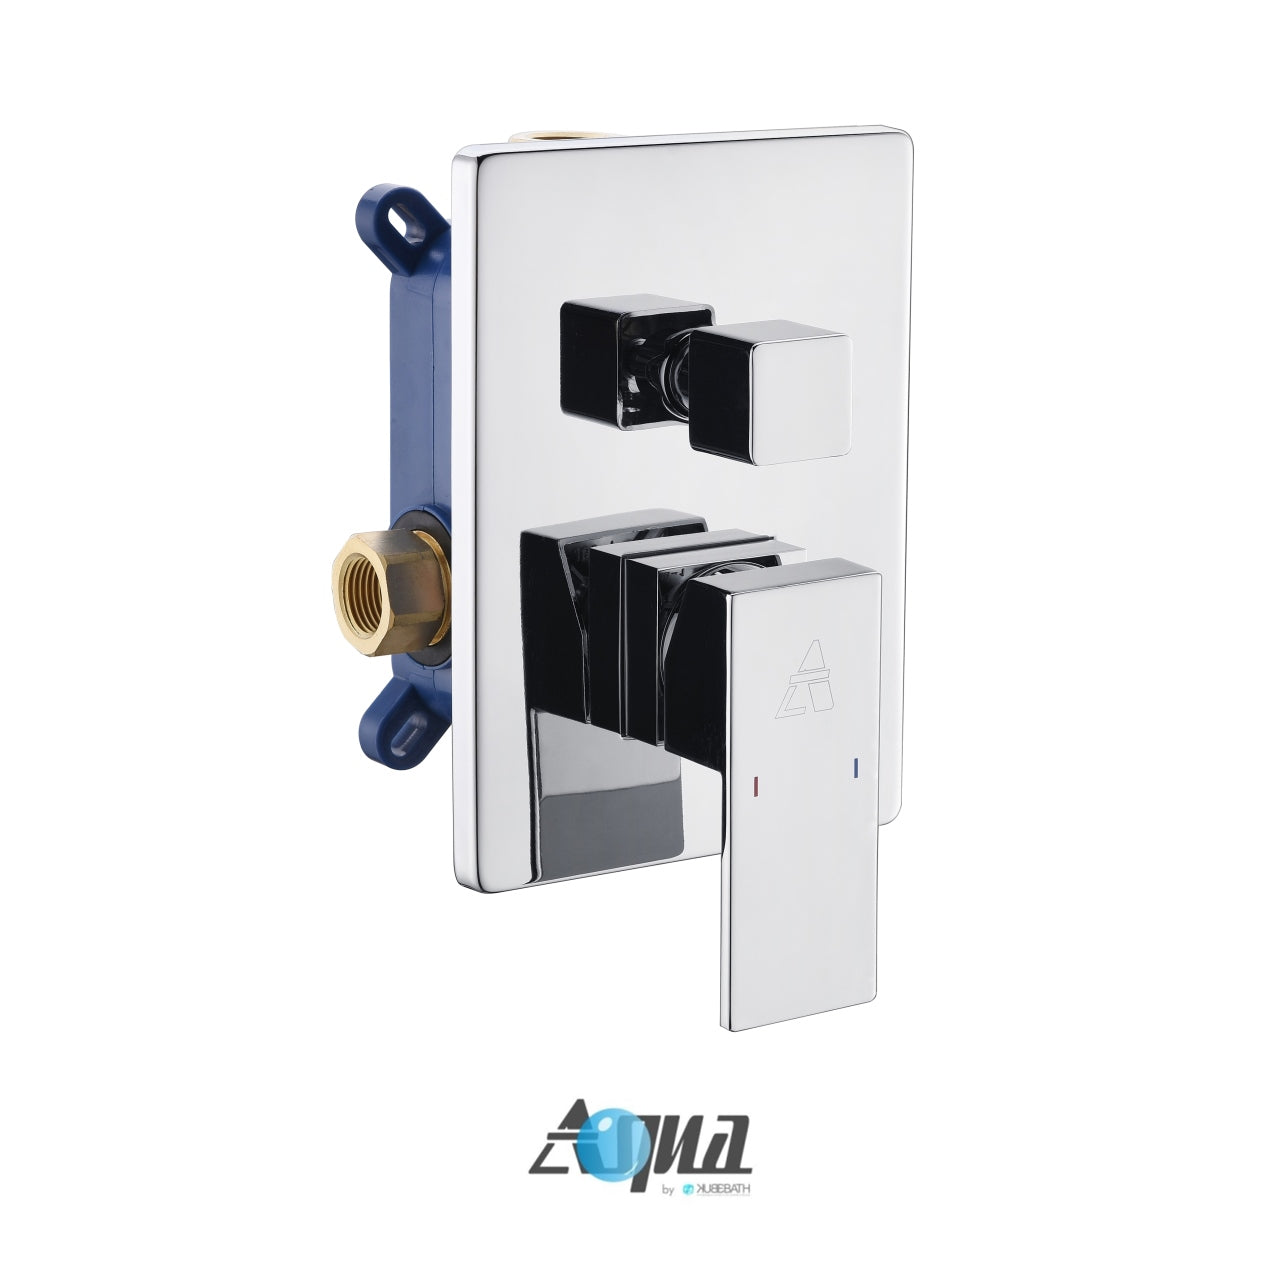 Aqua Piazza Brass Shower Set with Ceiling Mount Square Rain Shower and Handheld - Home and Bath Depot